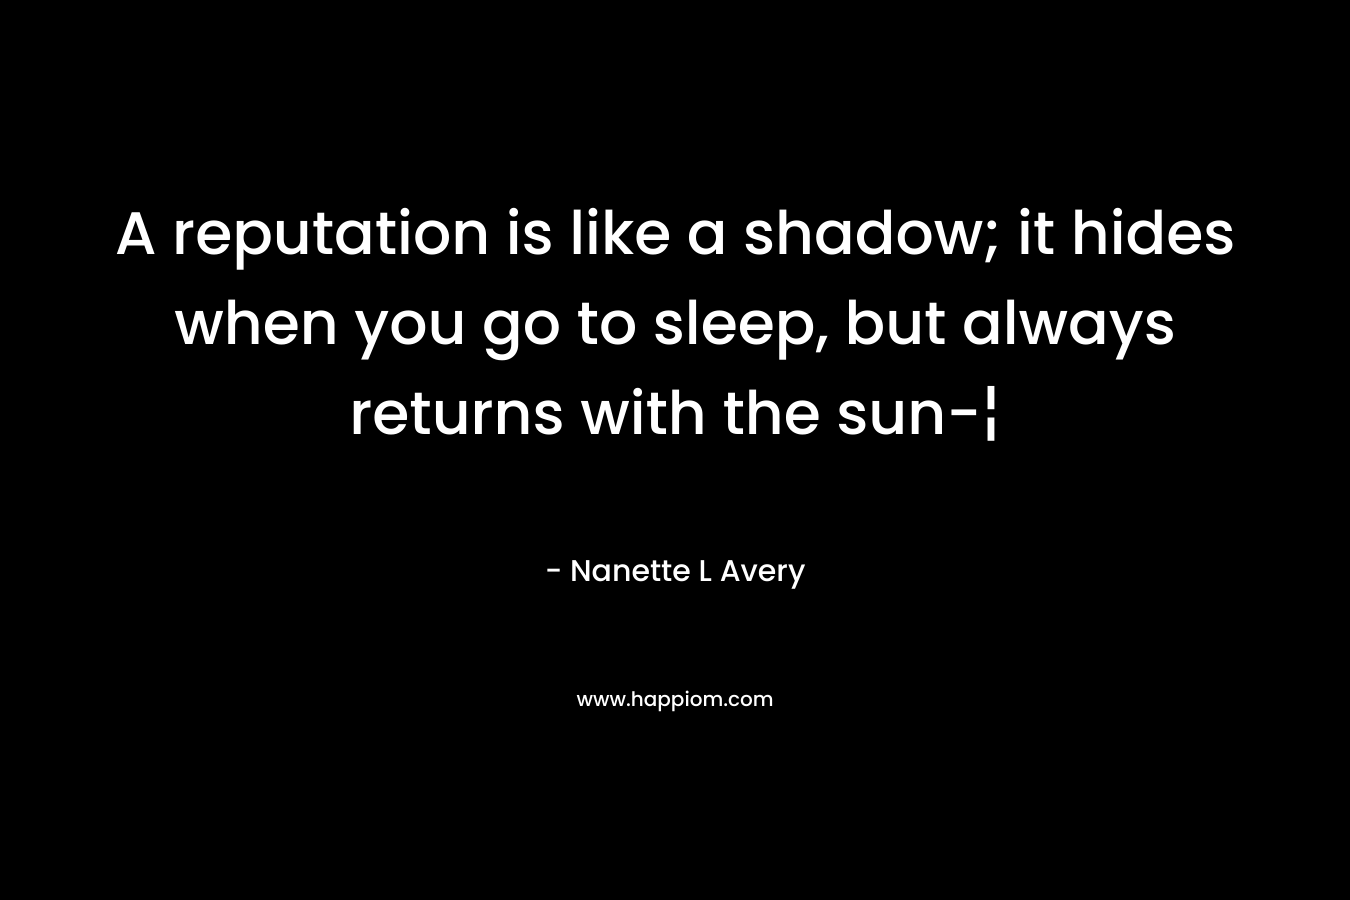 A reputation is like a shadow; it hides when you go to sleep, but always returns with the sun-¦ – Nanette L Avery